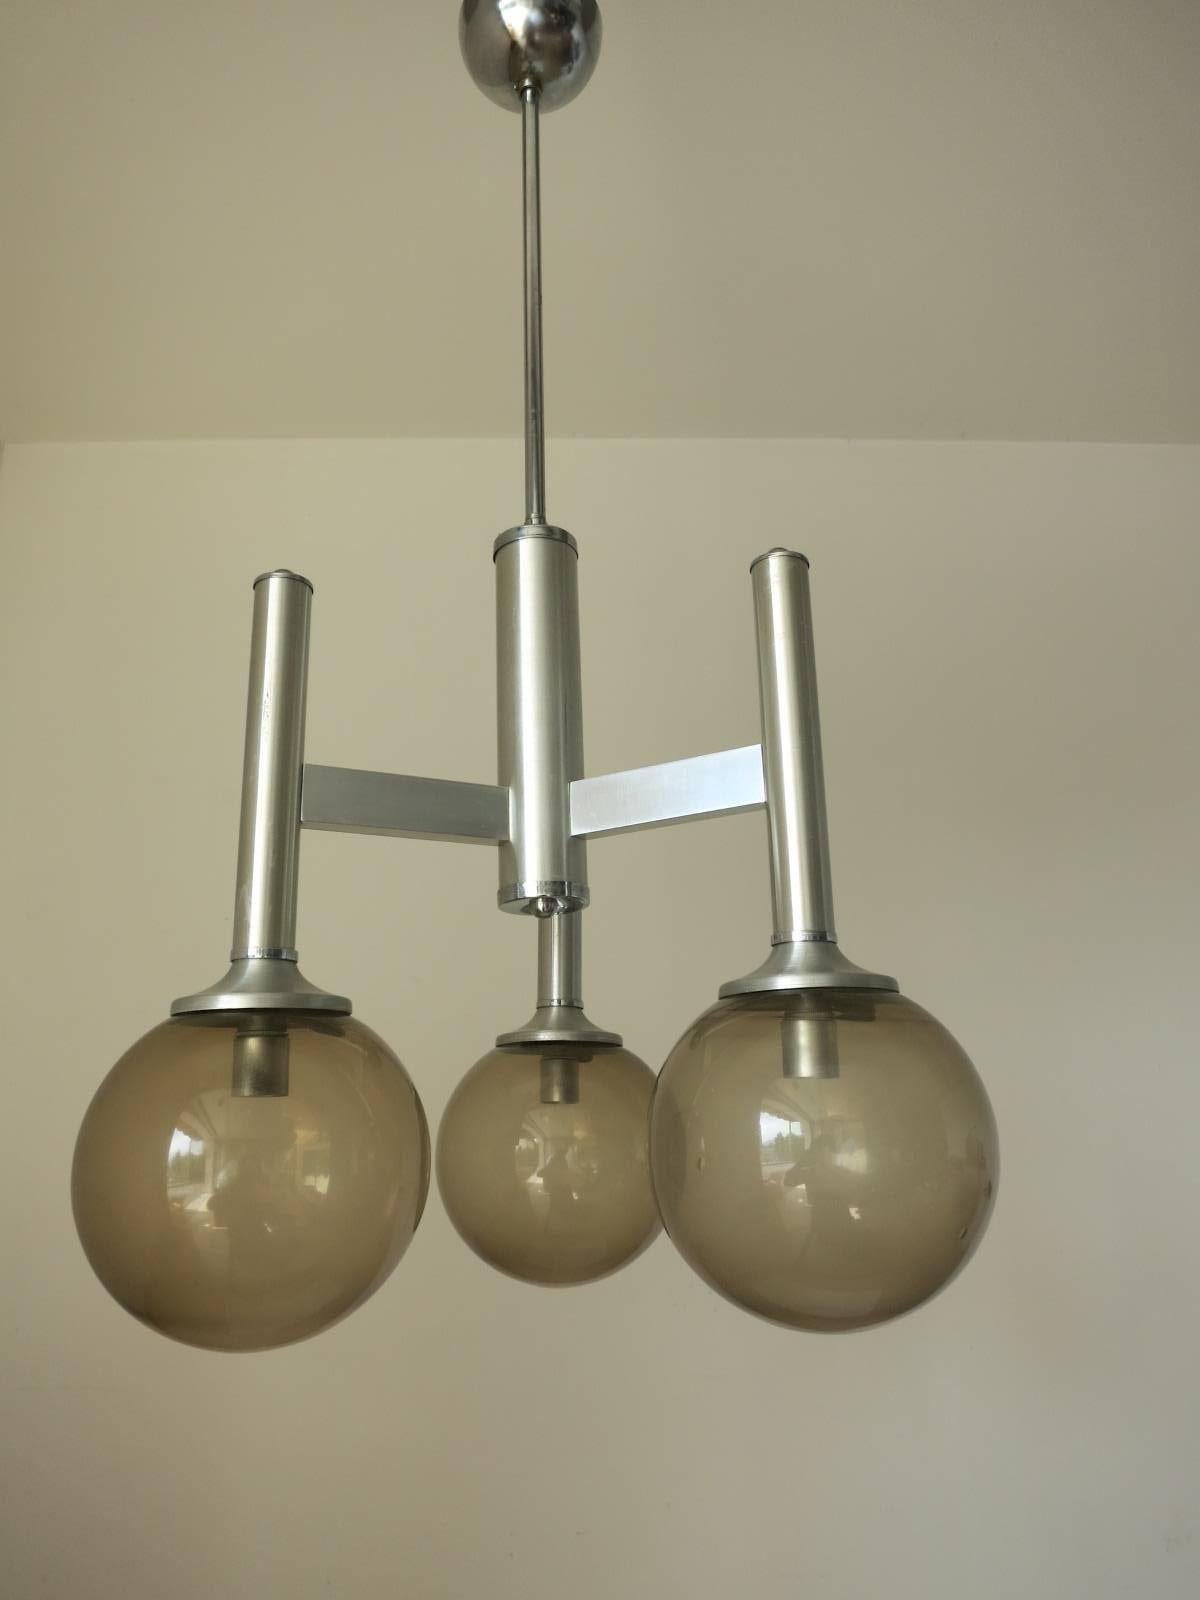 Vintage Italian pendant with three smoky Murano glass globes, mounted on brushed nickel frame / Designed by Sciolari circa 1960’s / Made in Italy
3 lights / E12 or E14 type / max 40W 
Diameter: 14 inches / Height: 34 inches including rod and